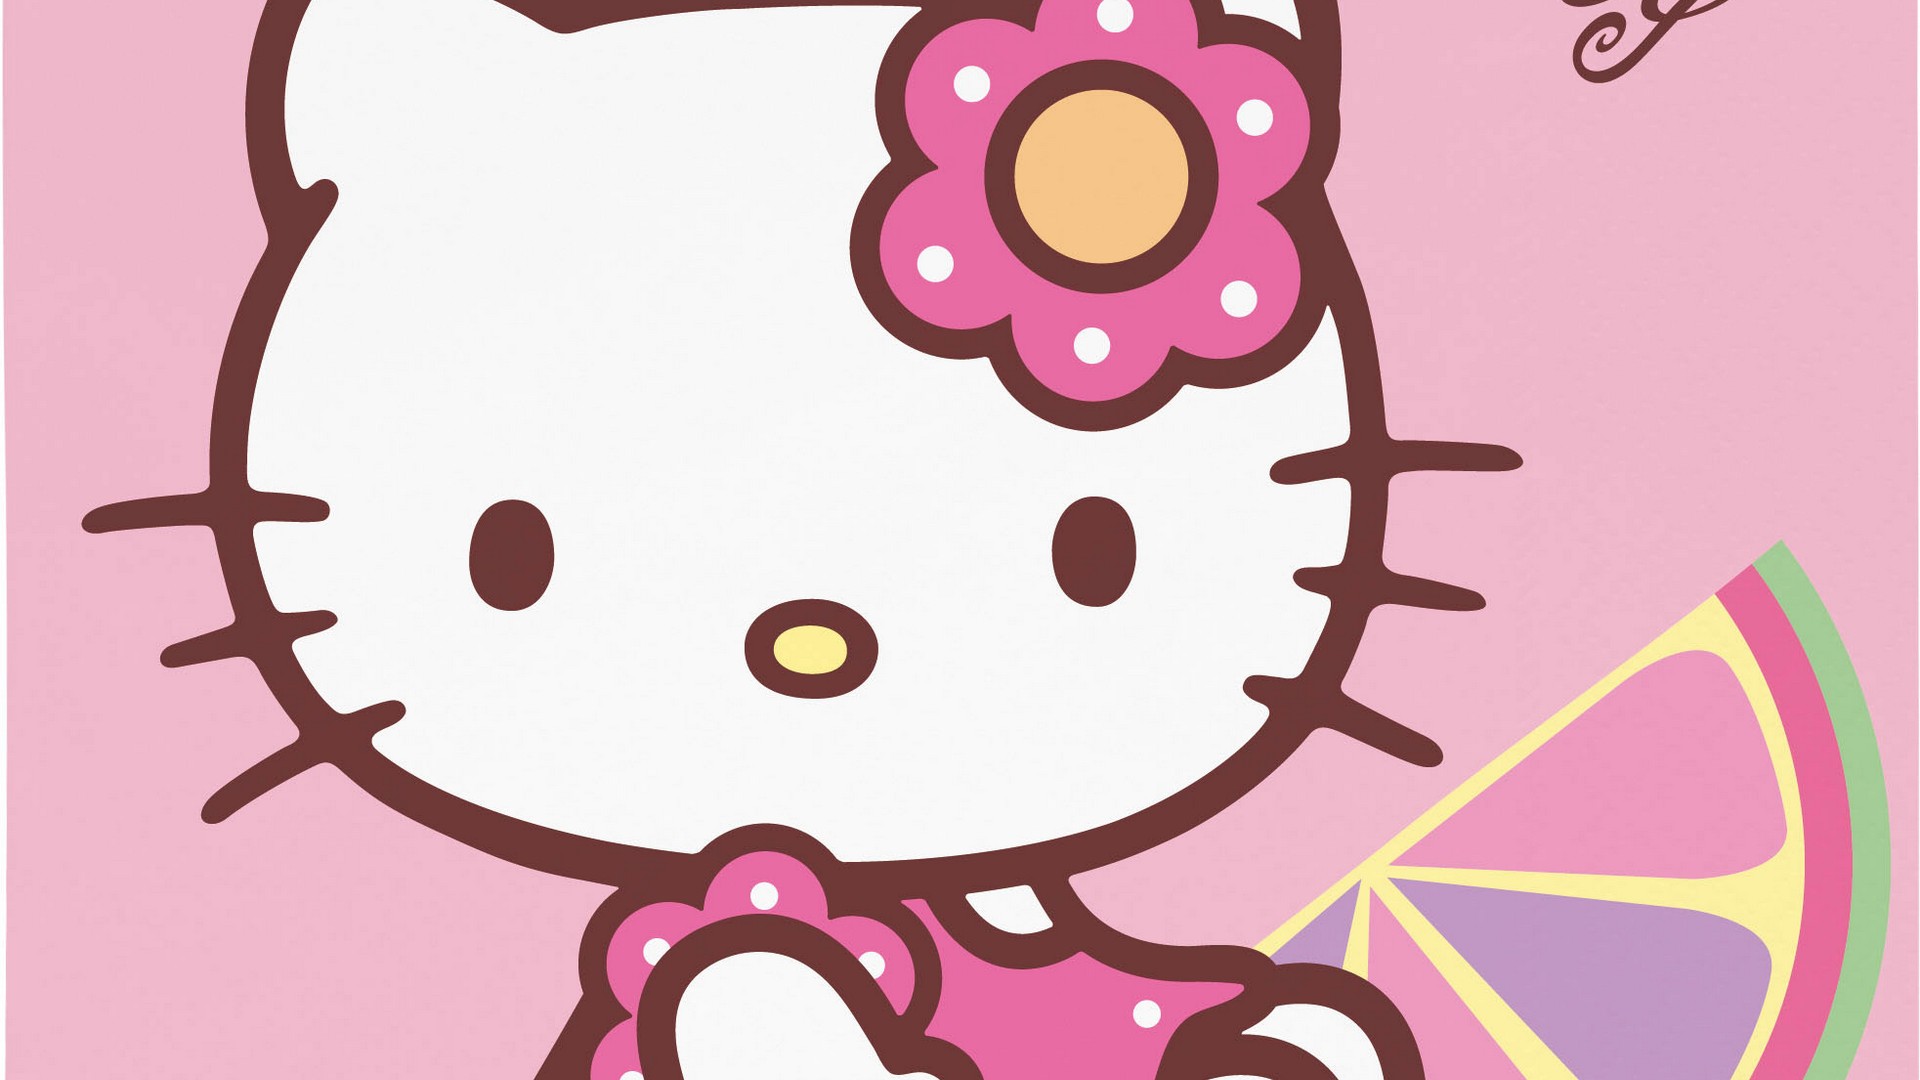 Hello Kitty Images Wallpaper HD With Resolution 1920X1080 pixel. You can make this wallpaper for your Desktop Computer Backgrounds, Mac Wallpapers, Android Lock screen or iPhone Screensavers